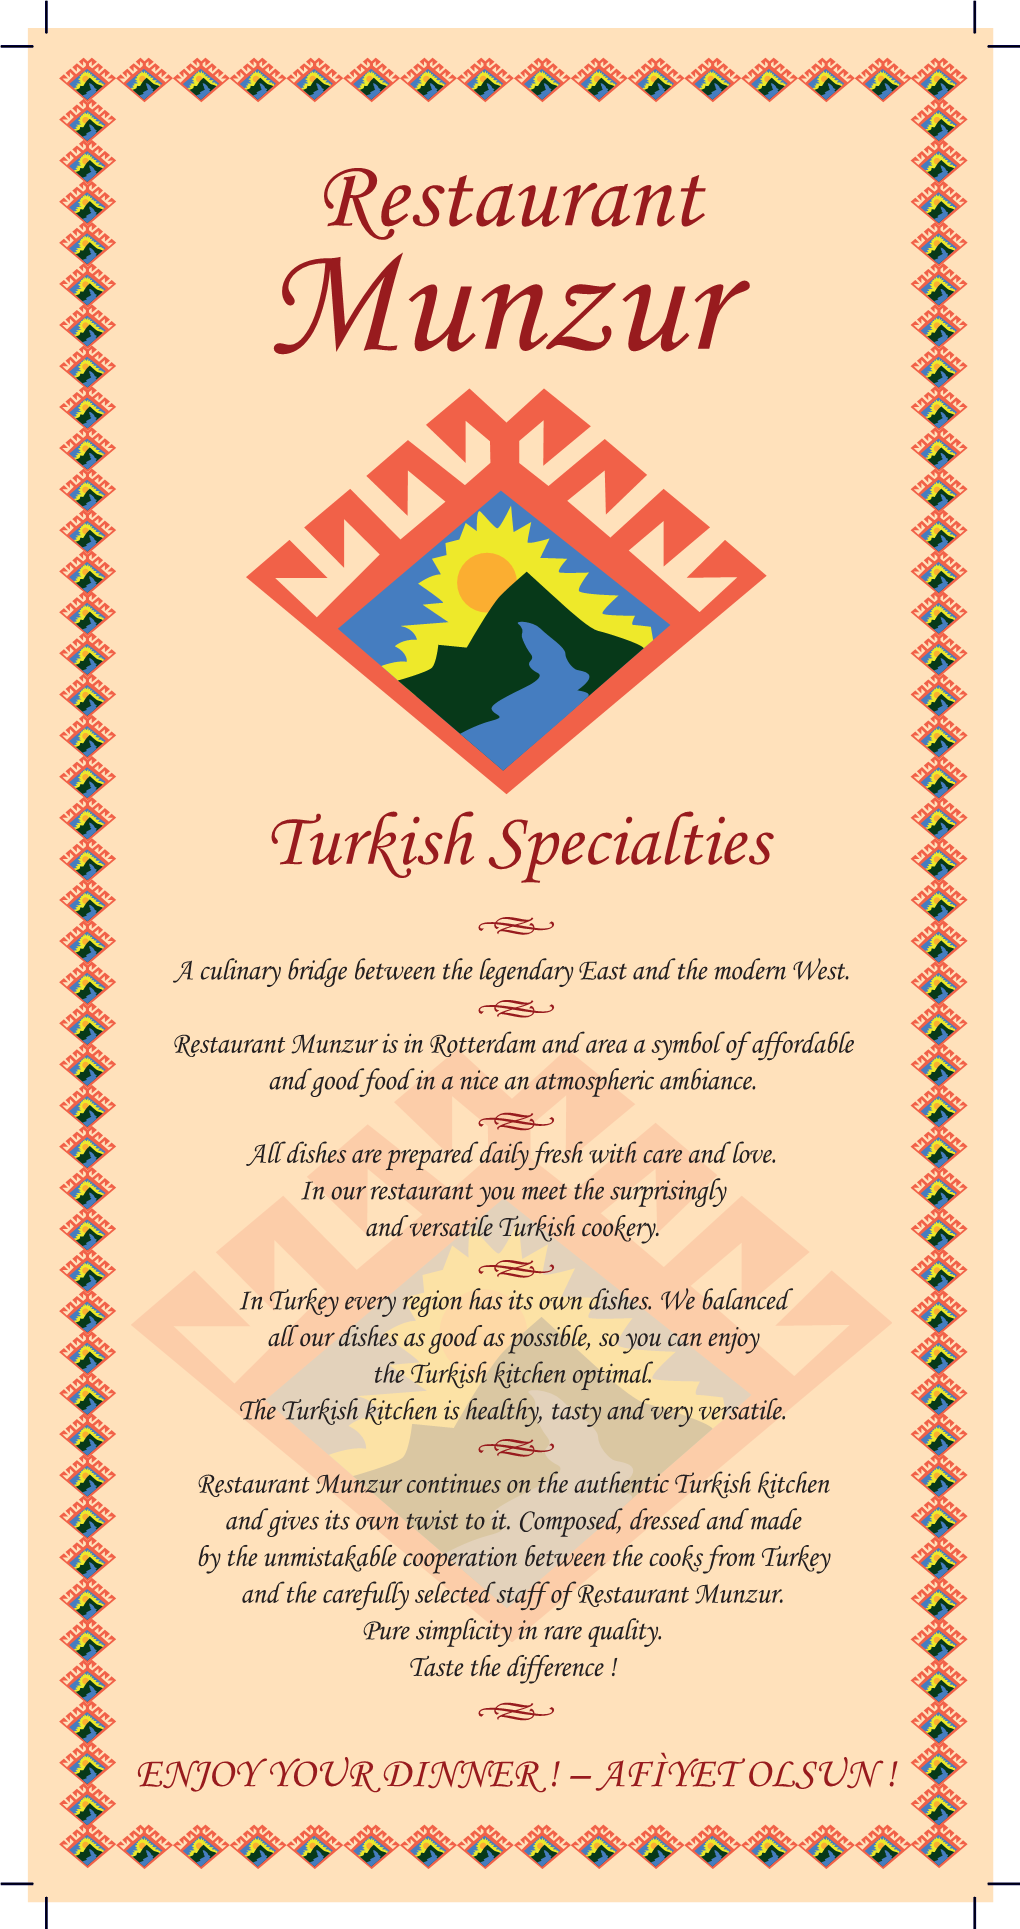 Turkish Specialties H a Culinary Bridge Between the Legendary East and the Modern West